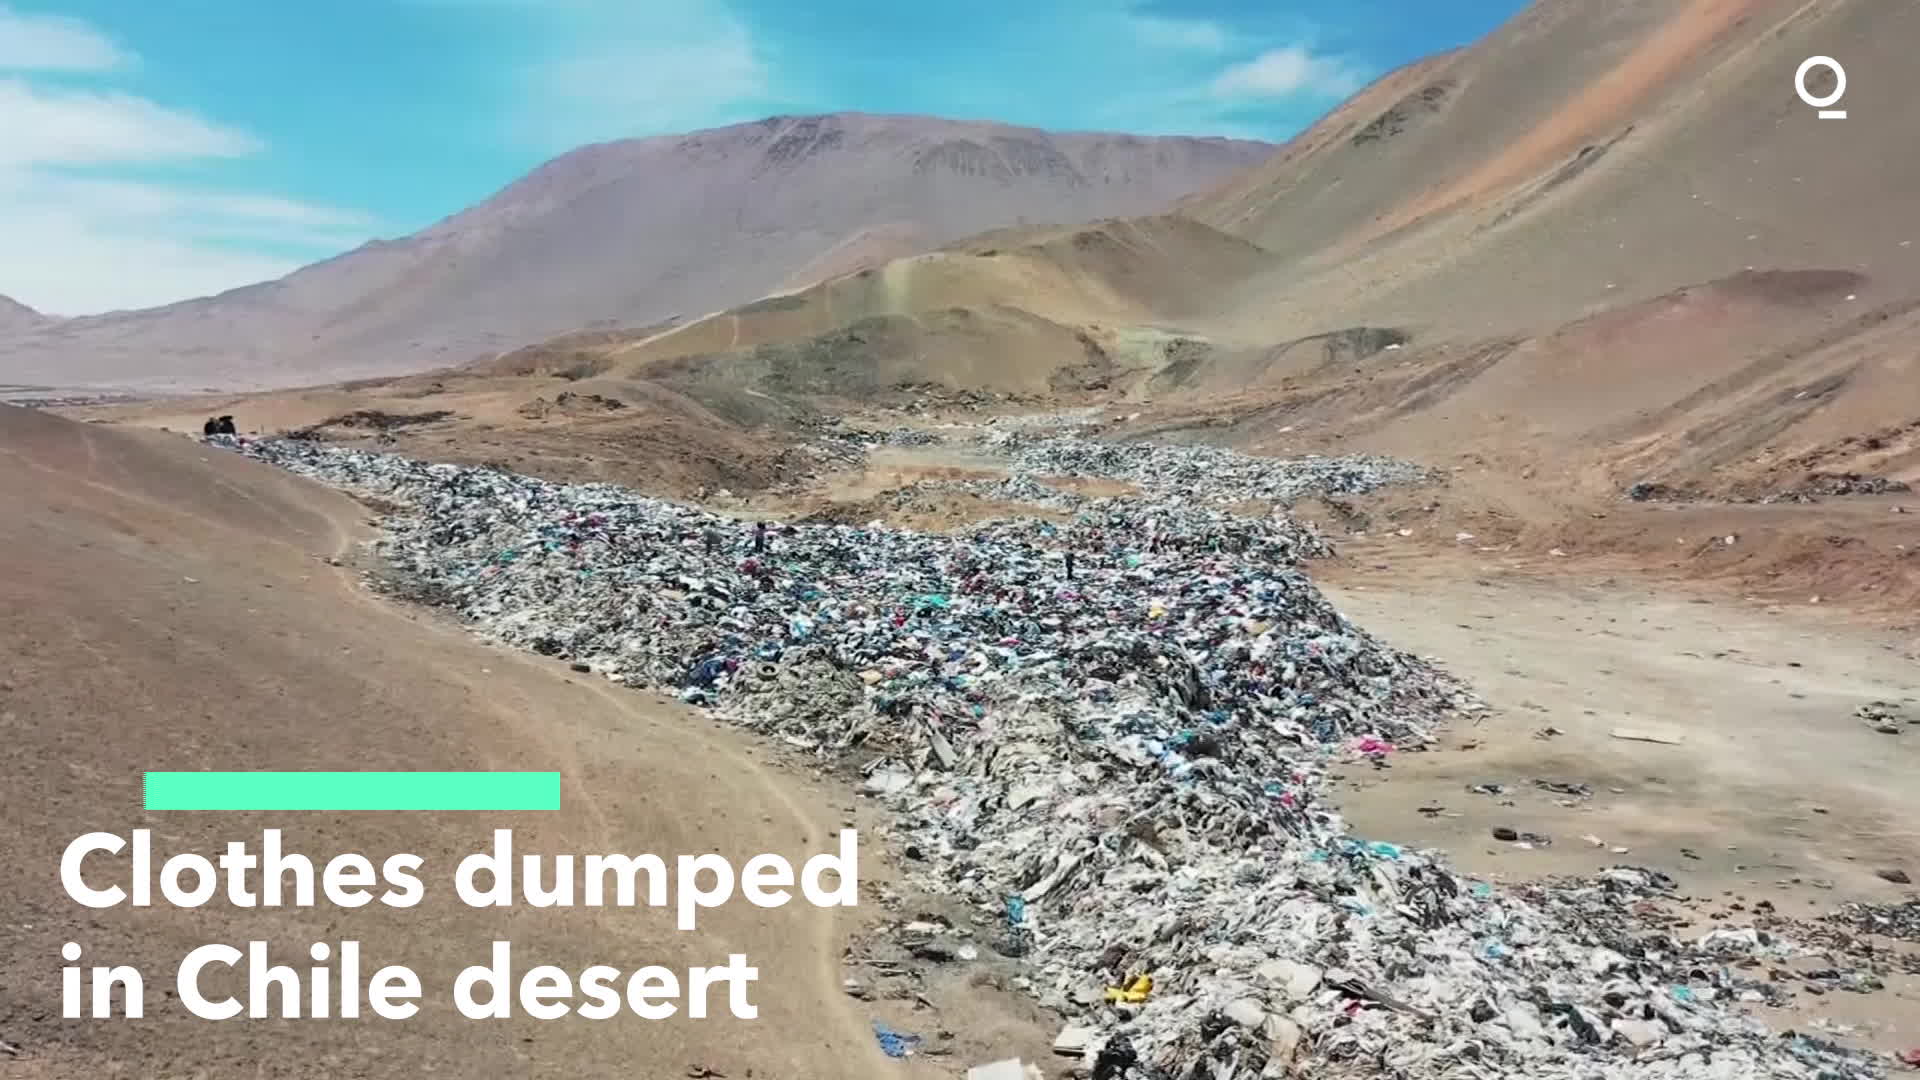 Watch Clothes Dumped in Chile Desert - Bloomberg